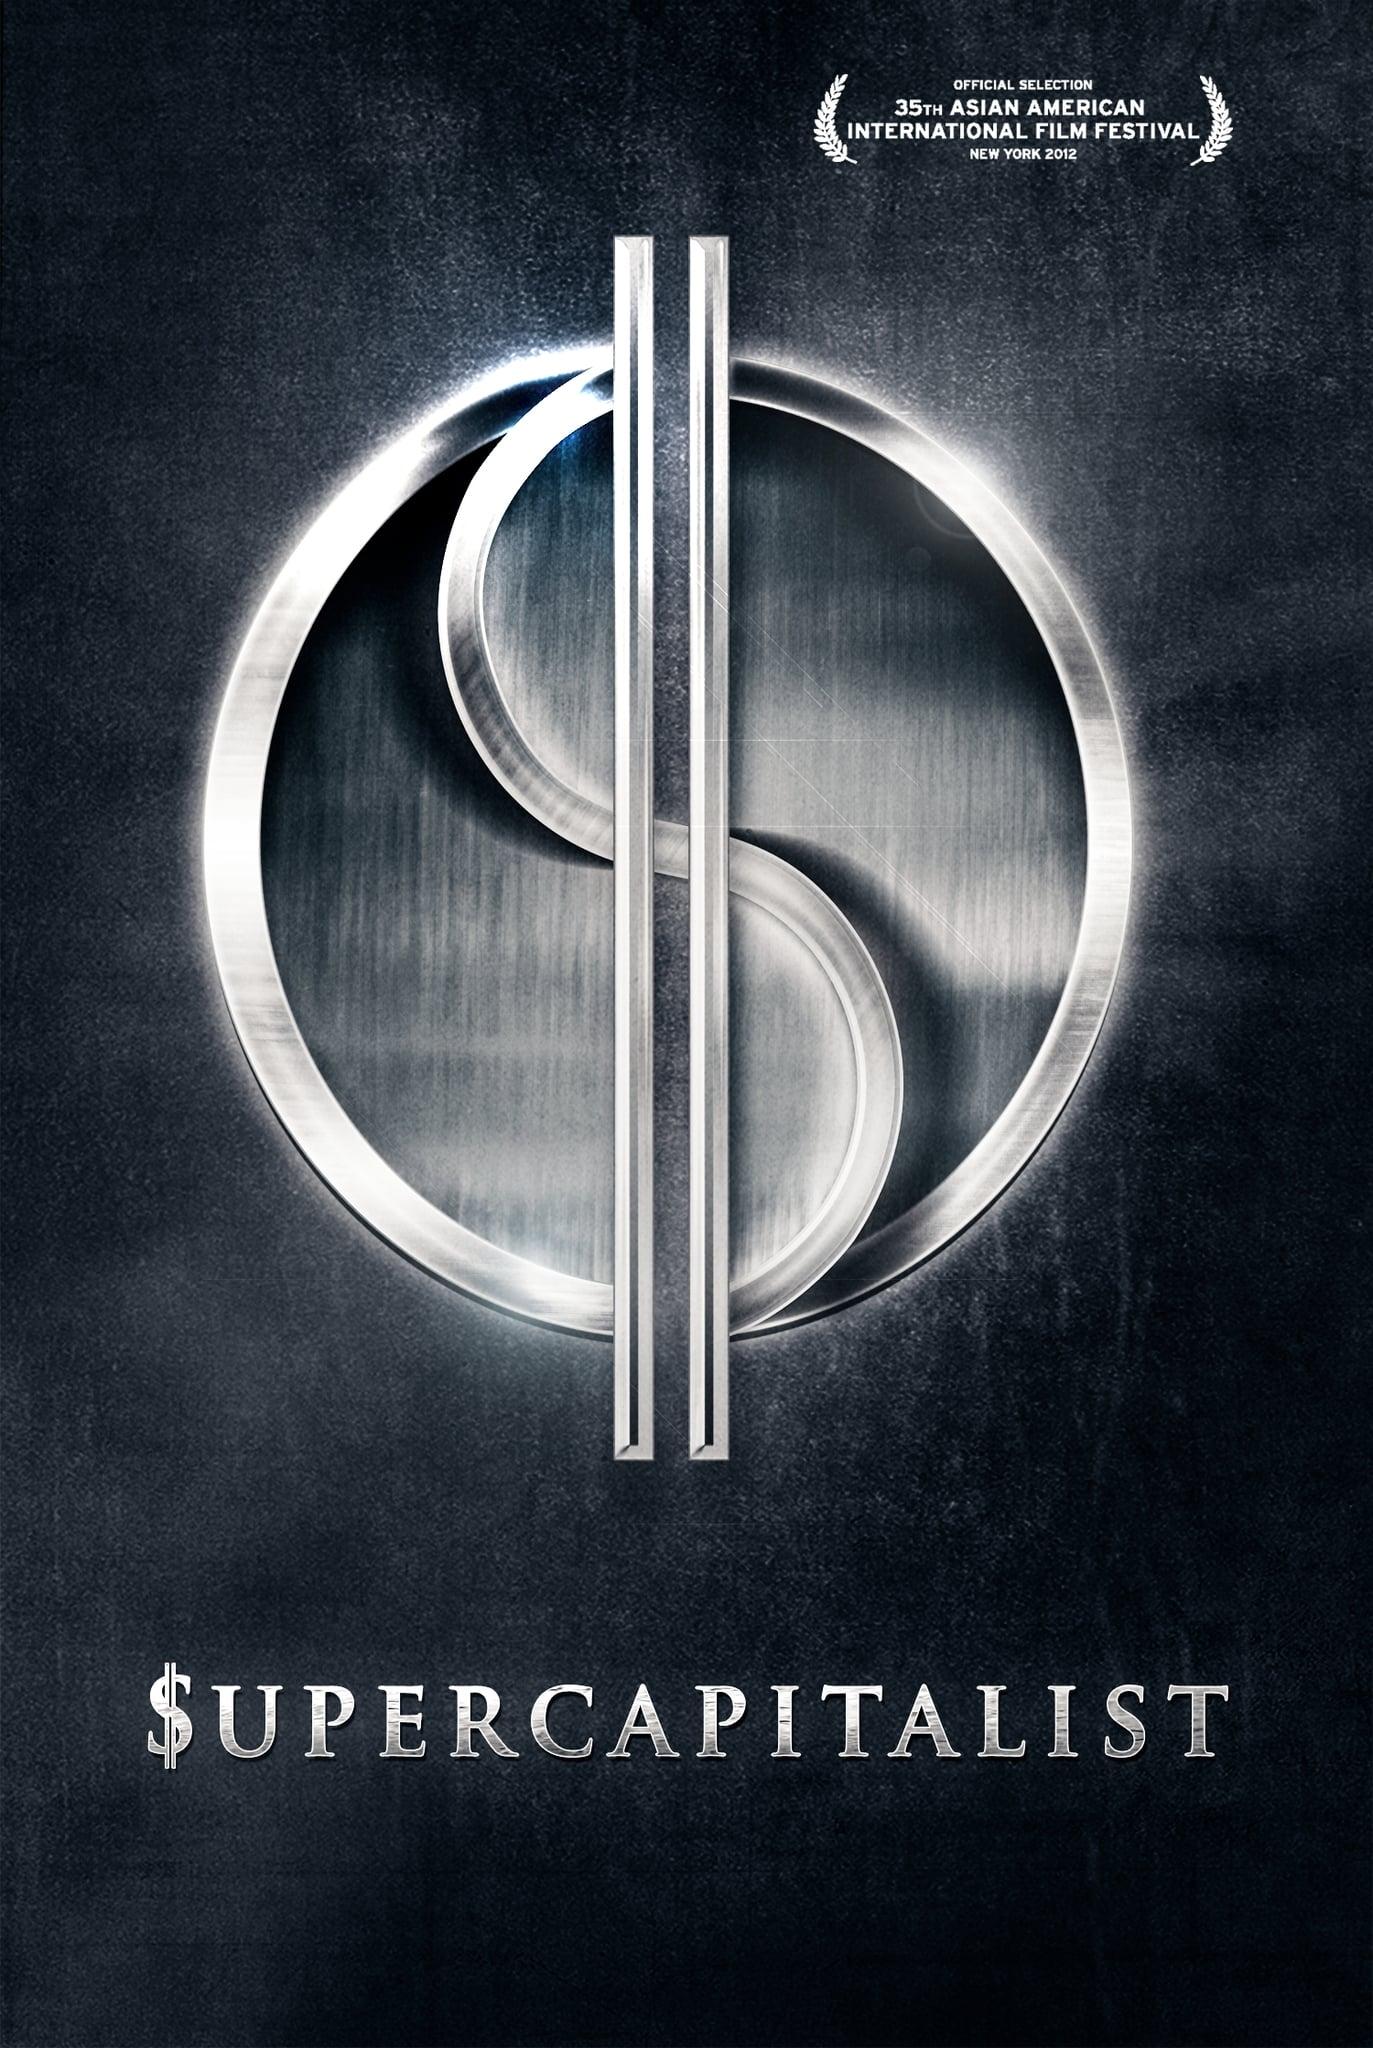 The Supercapitalist poster